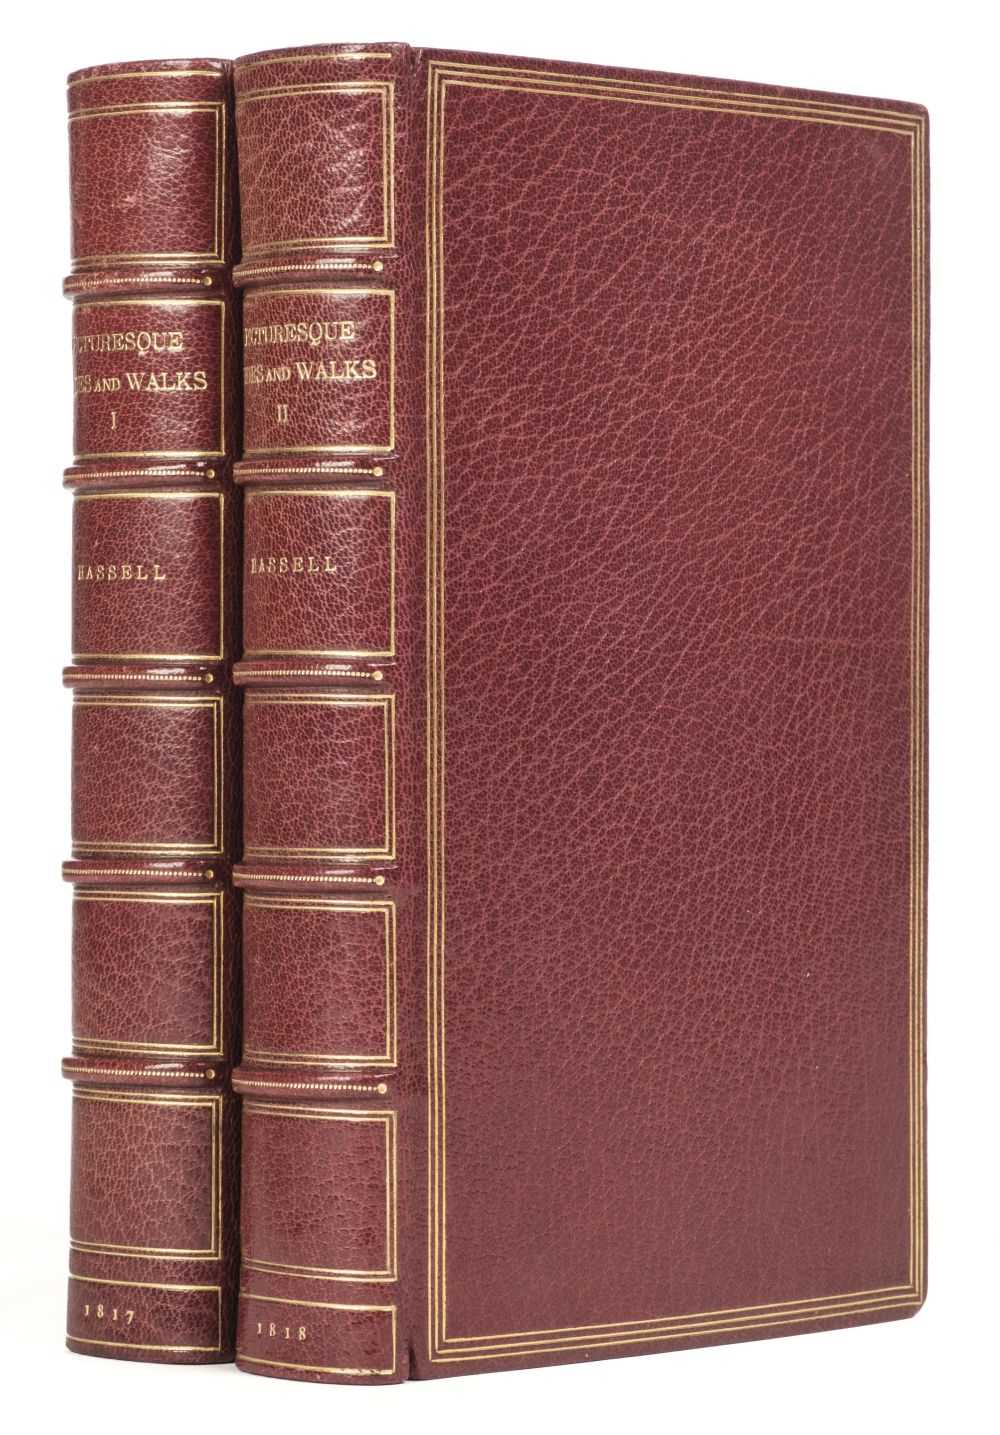 Lot 61 - Hassell (John). Picturesque Rides and Walks, 2 volumes, 1817-18